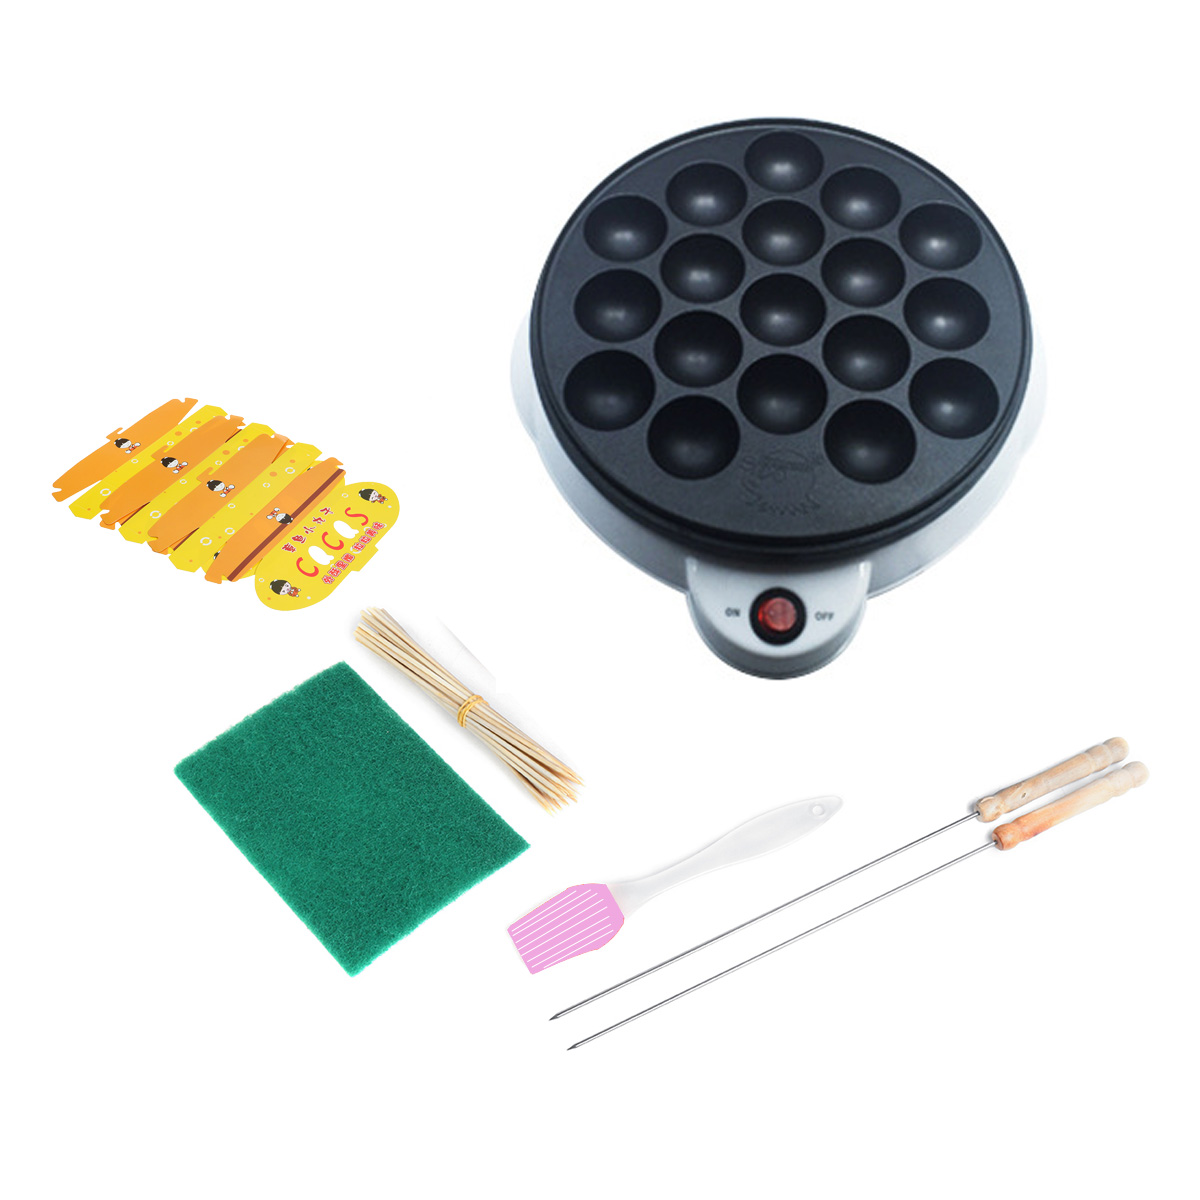 Professional 18 Hole Takoyaki Grill Pan Electric DIY Home Octopus Meat Ball Maker Plate Set Baking Machine Household